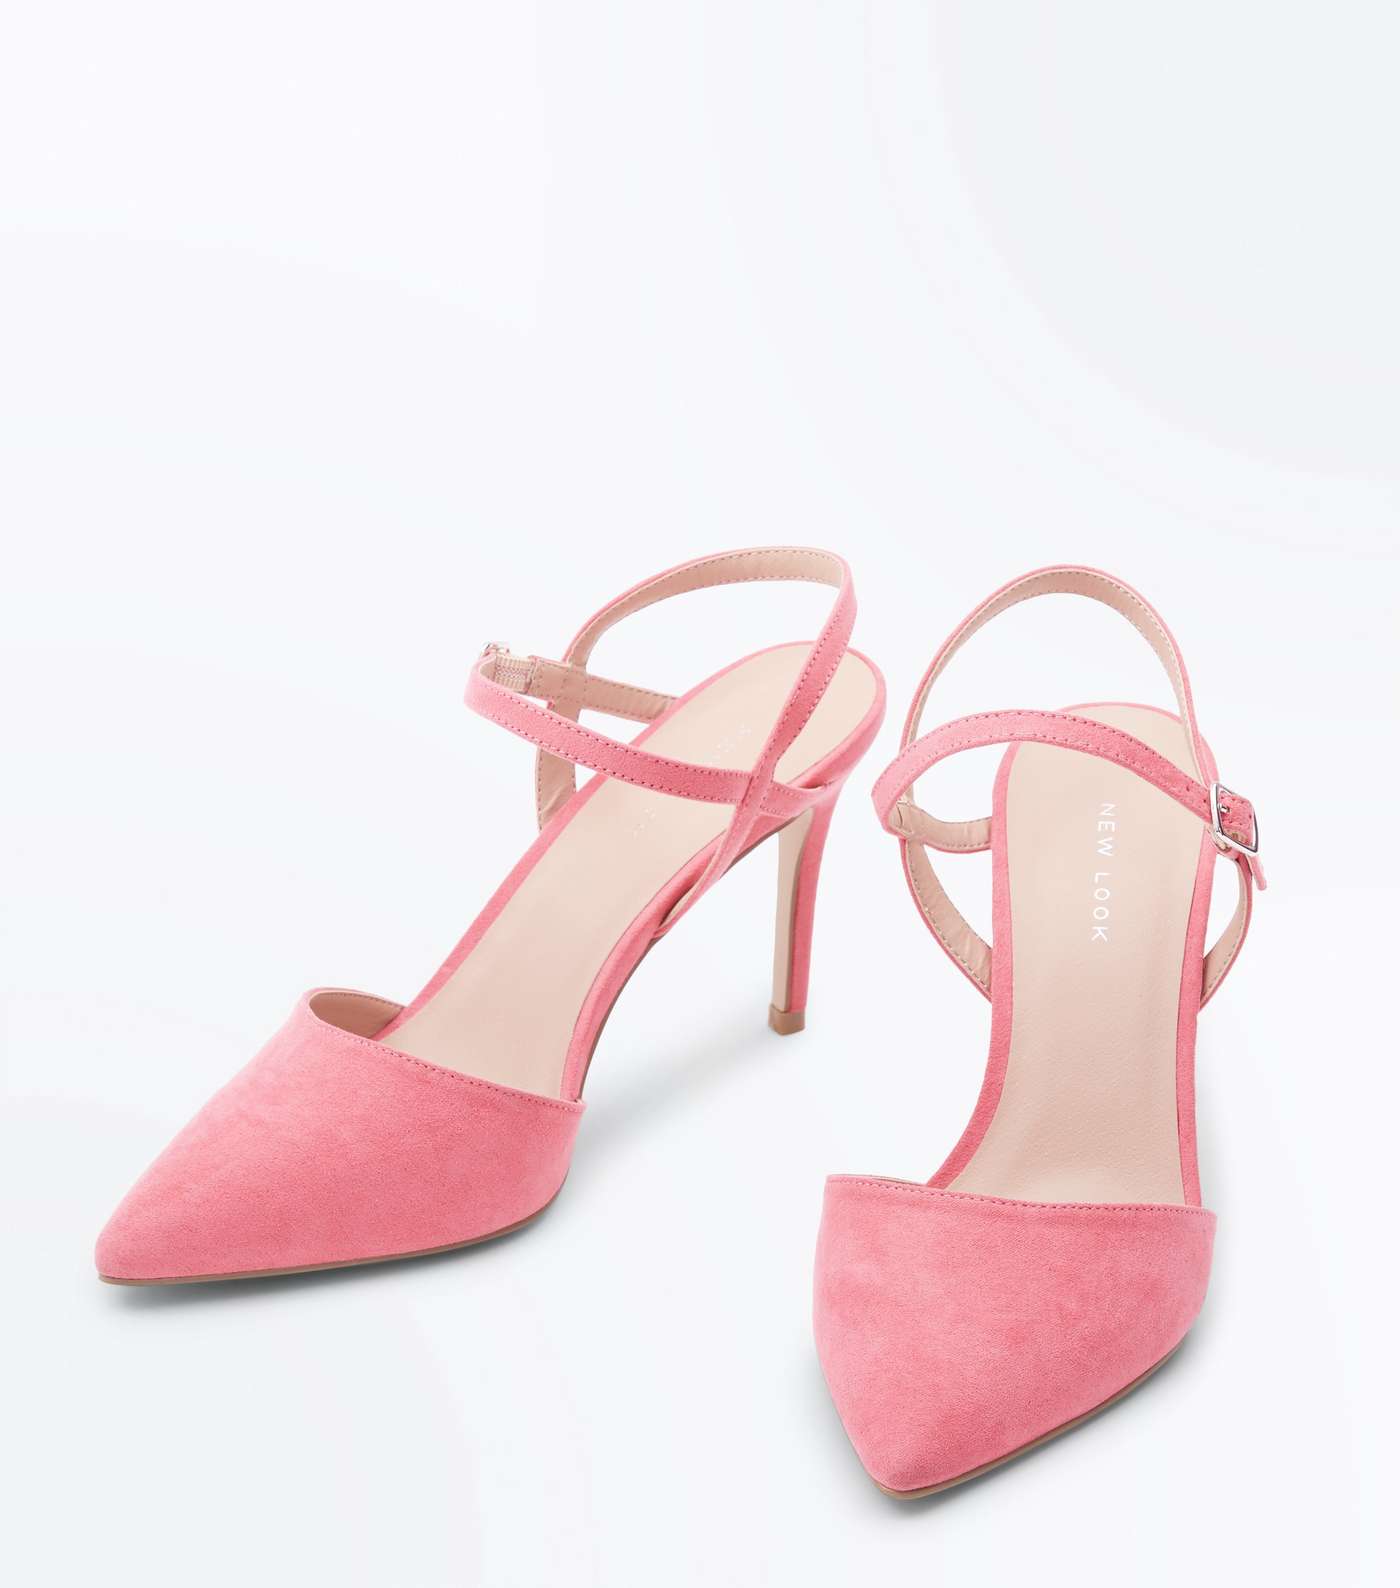 Pink Suedette Ankle Strap Pointed Court Shoes Image 3